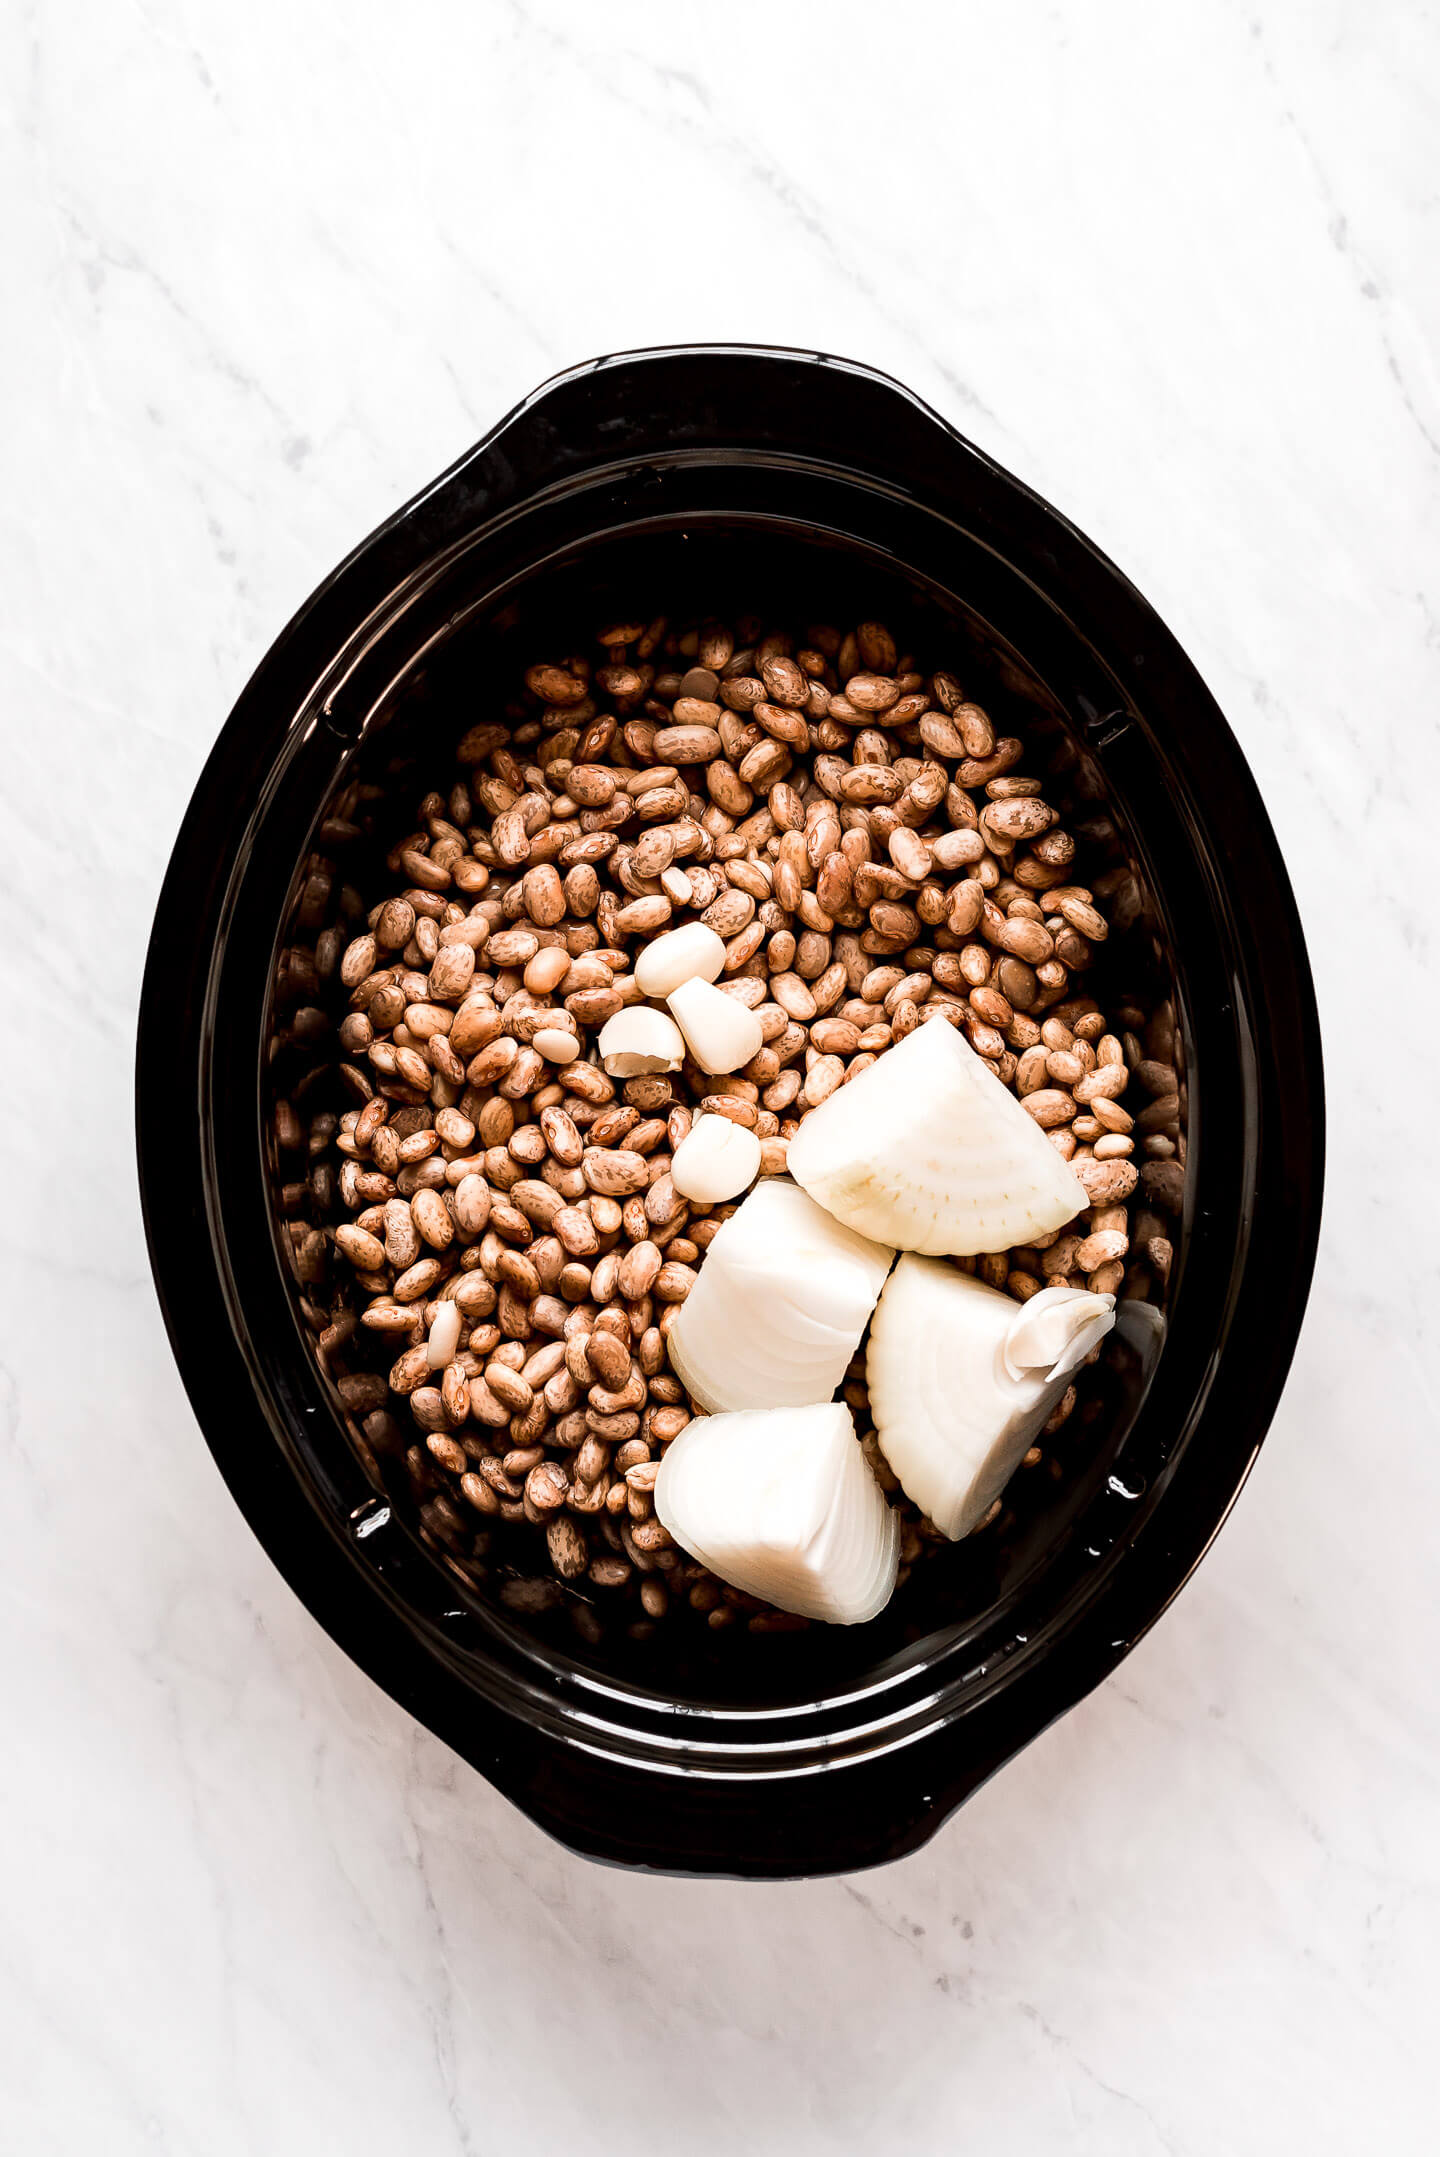 Pinto beans, garlic, and onion in a slow cooker.